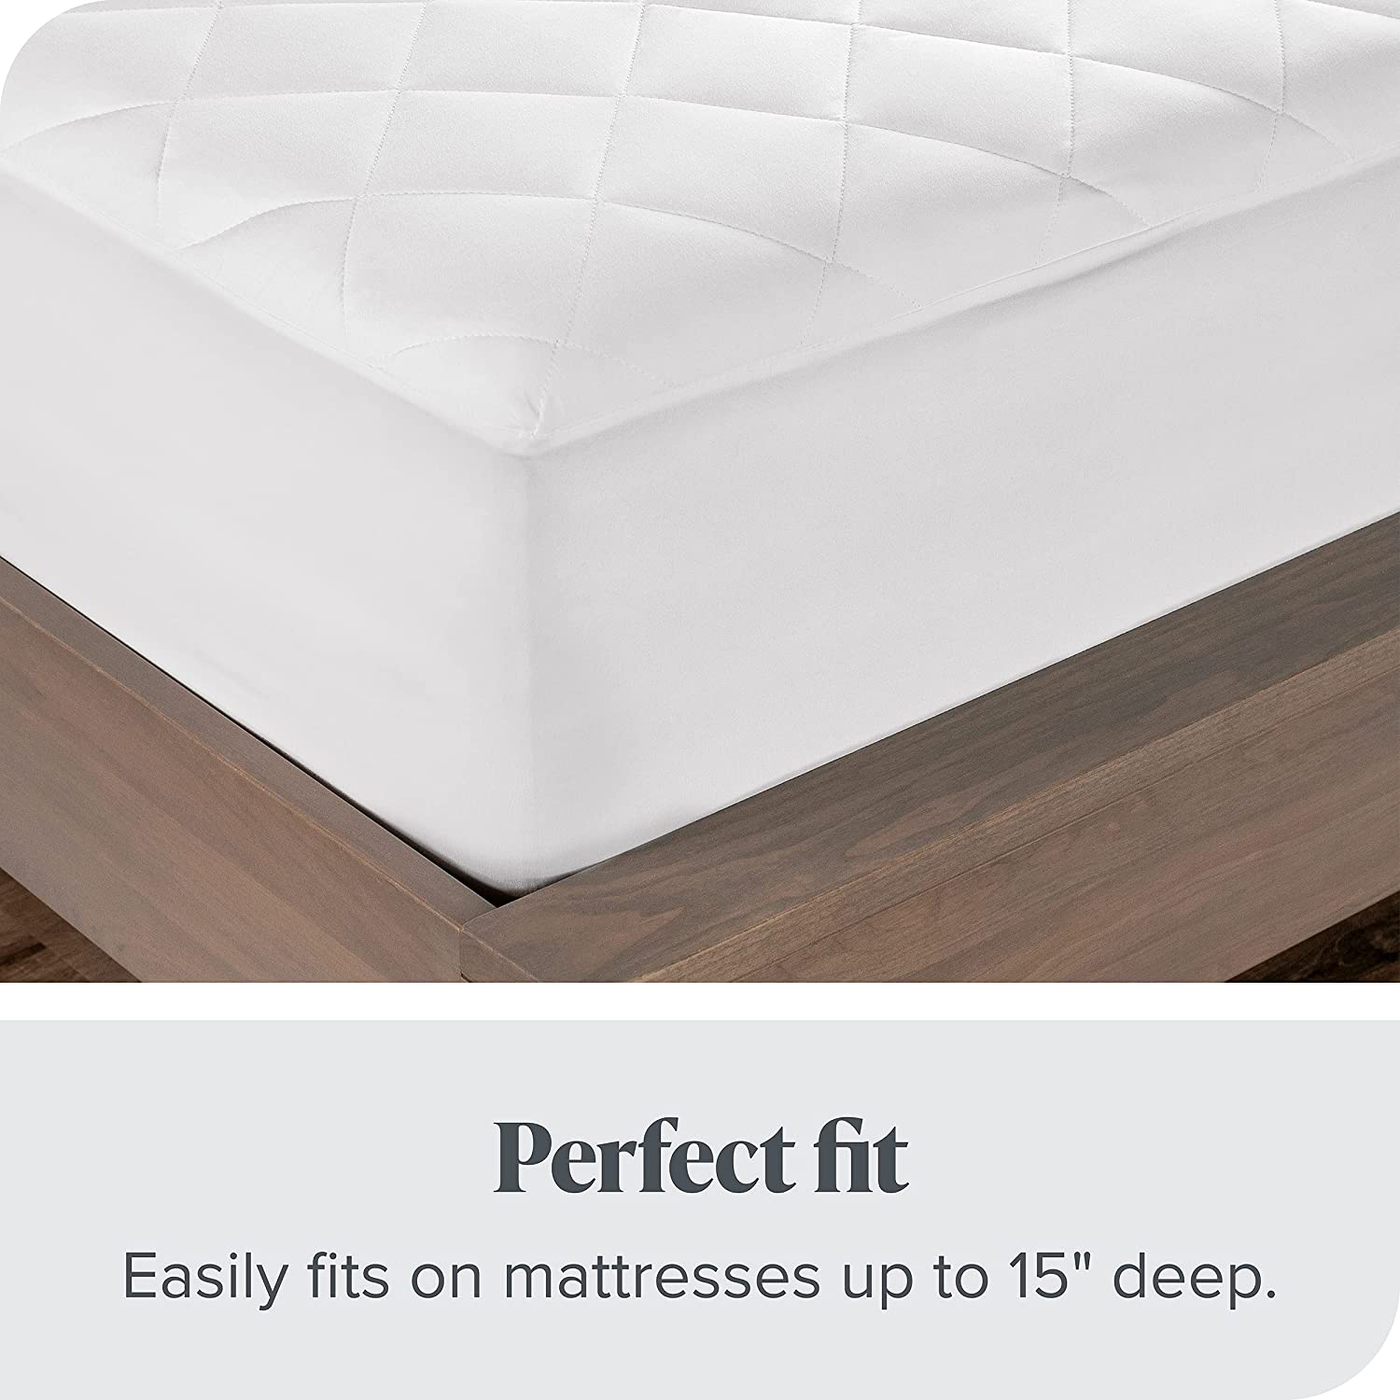 Bare Home Quilted Fitted Mattress Pad (King) - Cooling Mattress Topper - Easily Washable - Elastic Fitted Mattress Cover - Stretch-to-Fit up to 15 Inches Deep (King)